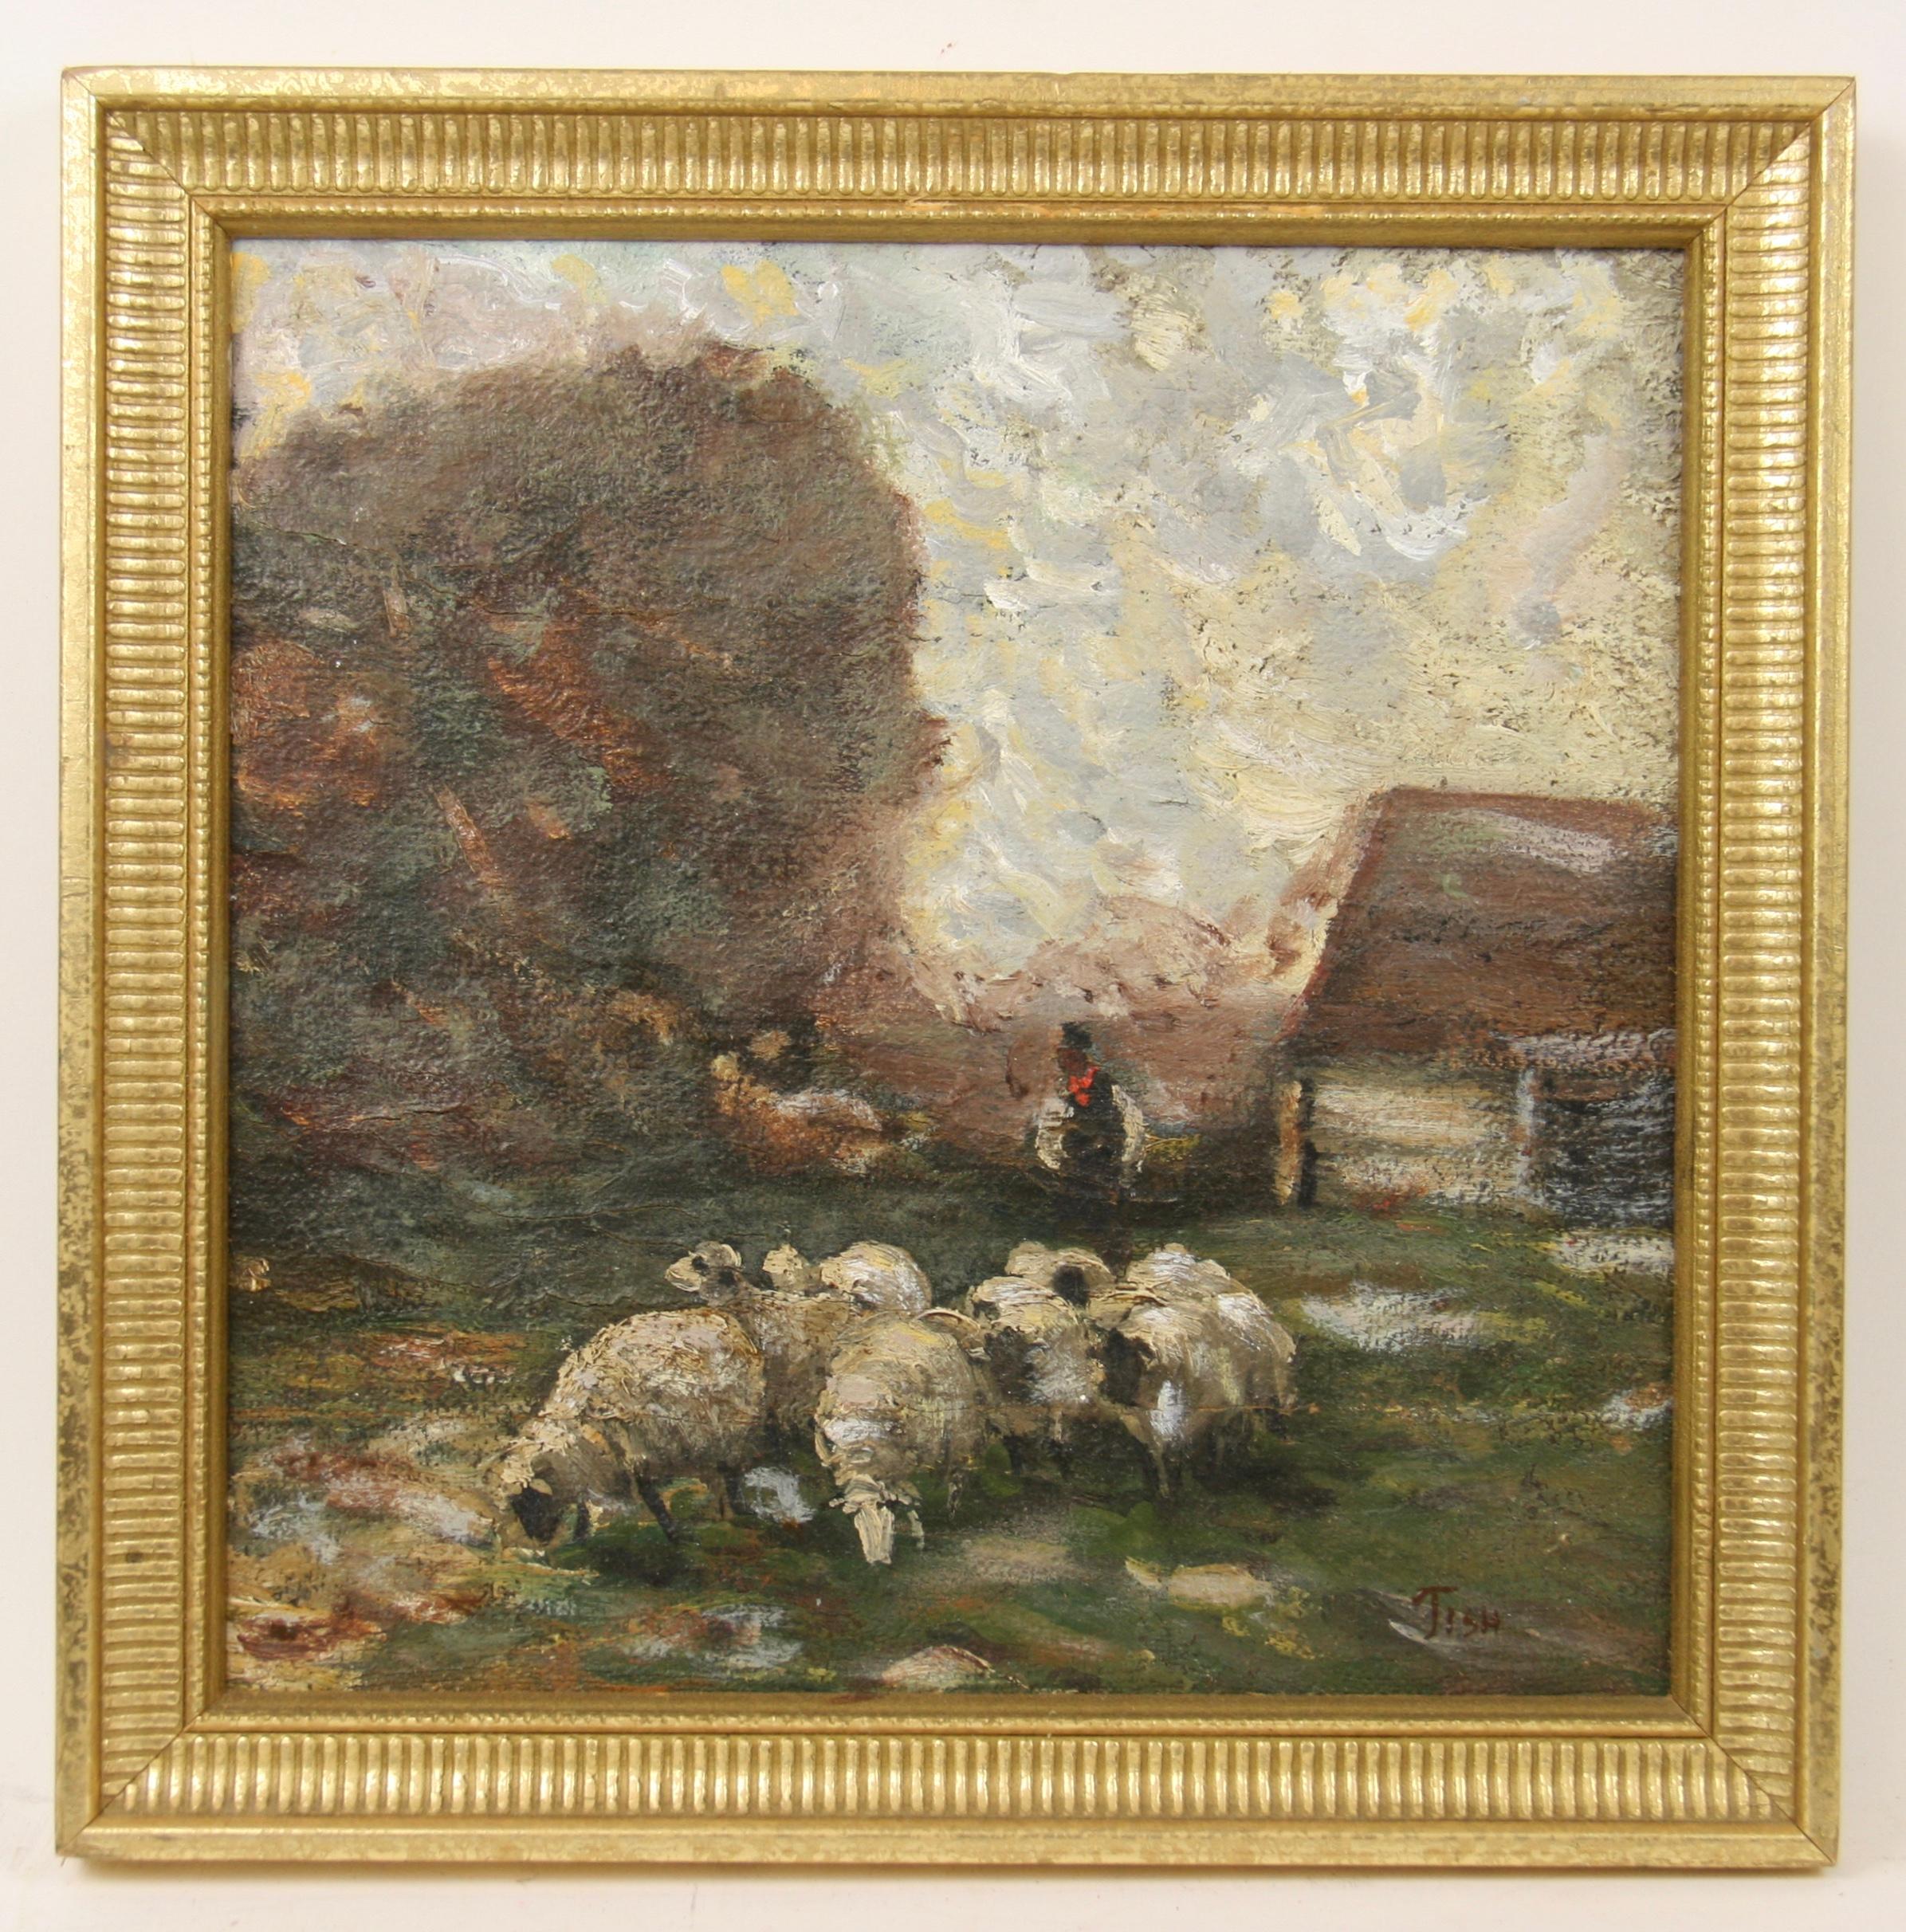 5-2410 French Pastoral Scenes ,a 1915 's oil on canvas applied to a board, displayed in a gilt wood frame, signed lower right by Tish